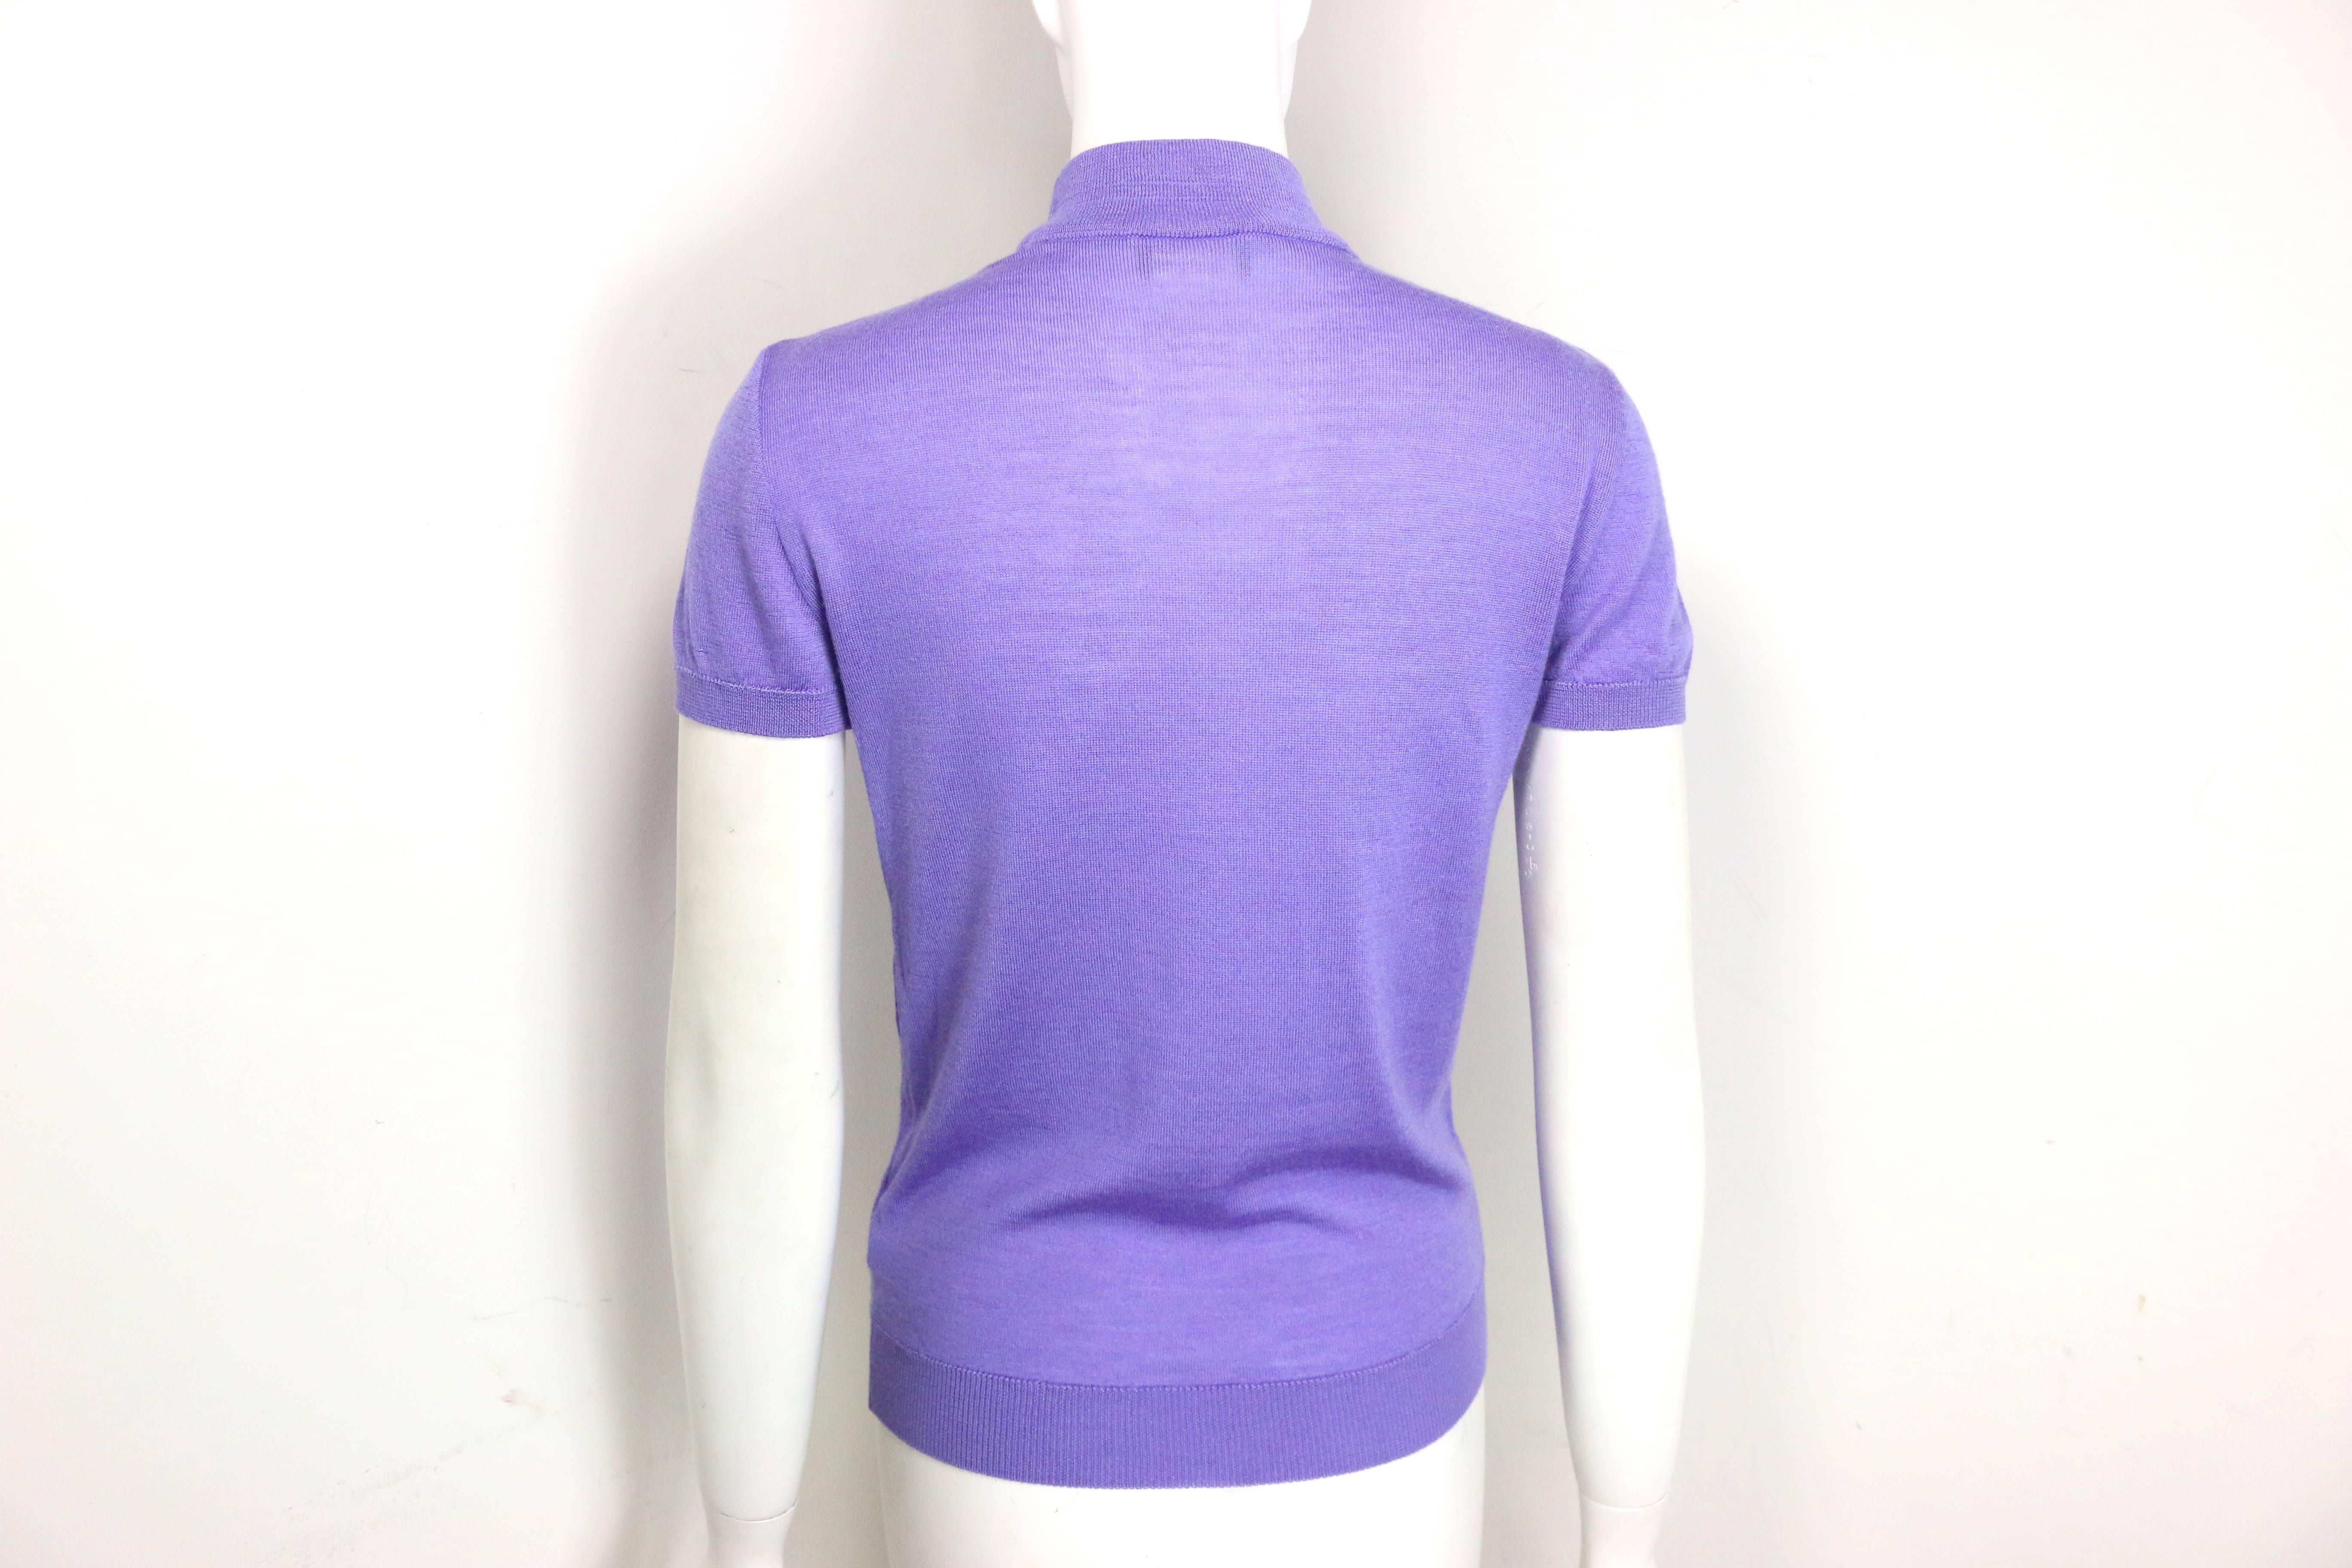 - Vintage 90s Gianni Versace couture purple cashmere and wool mock neck short sleeves pullover top. 

- Made in Italy. 

- Size 42. 

- Bust: 28 inches. Shoulder: 16 inches. Height: 23 inches. 

